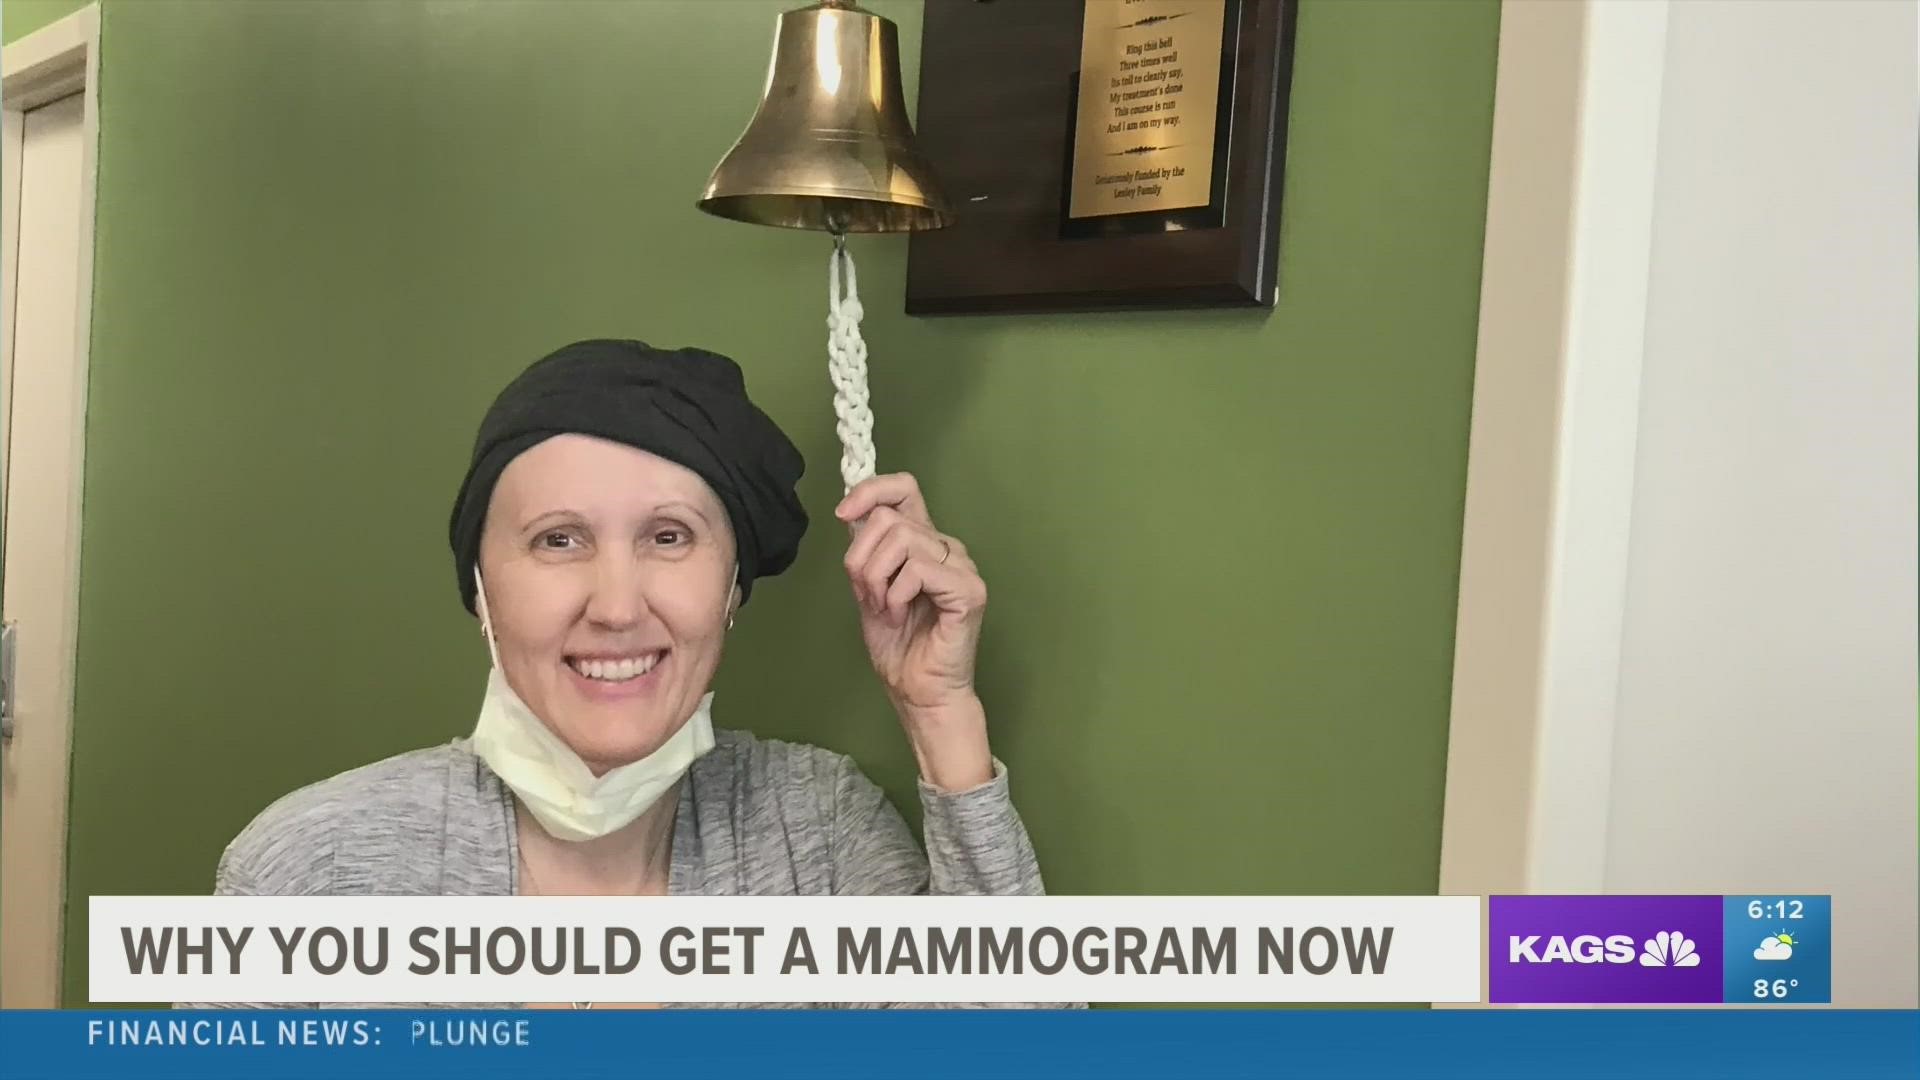 Breast Cancer survivor Angie Daniel shared the importance of getting yourself checked out on a regular basis and why local cancer care matters.